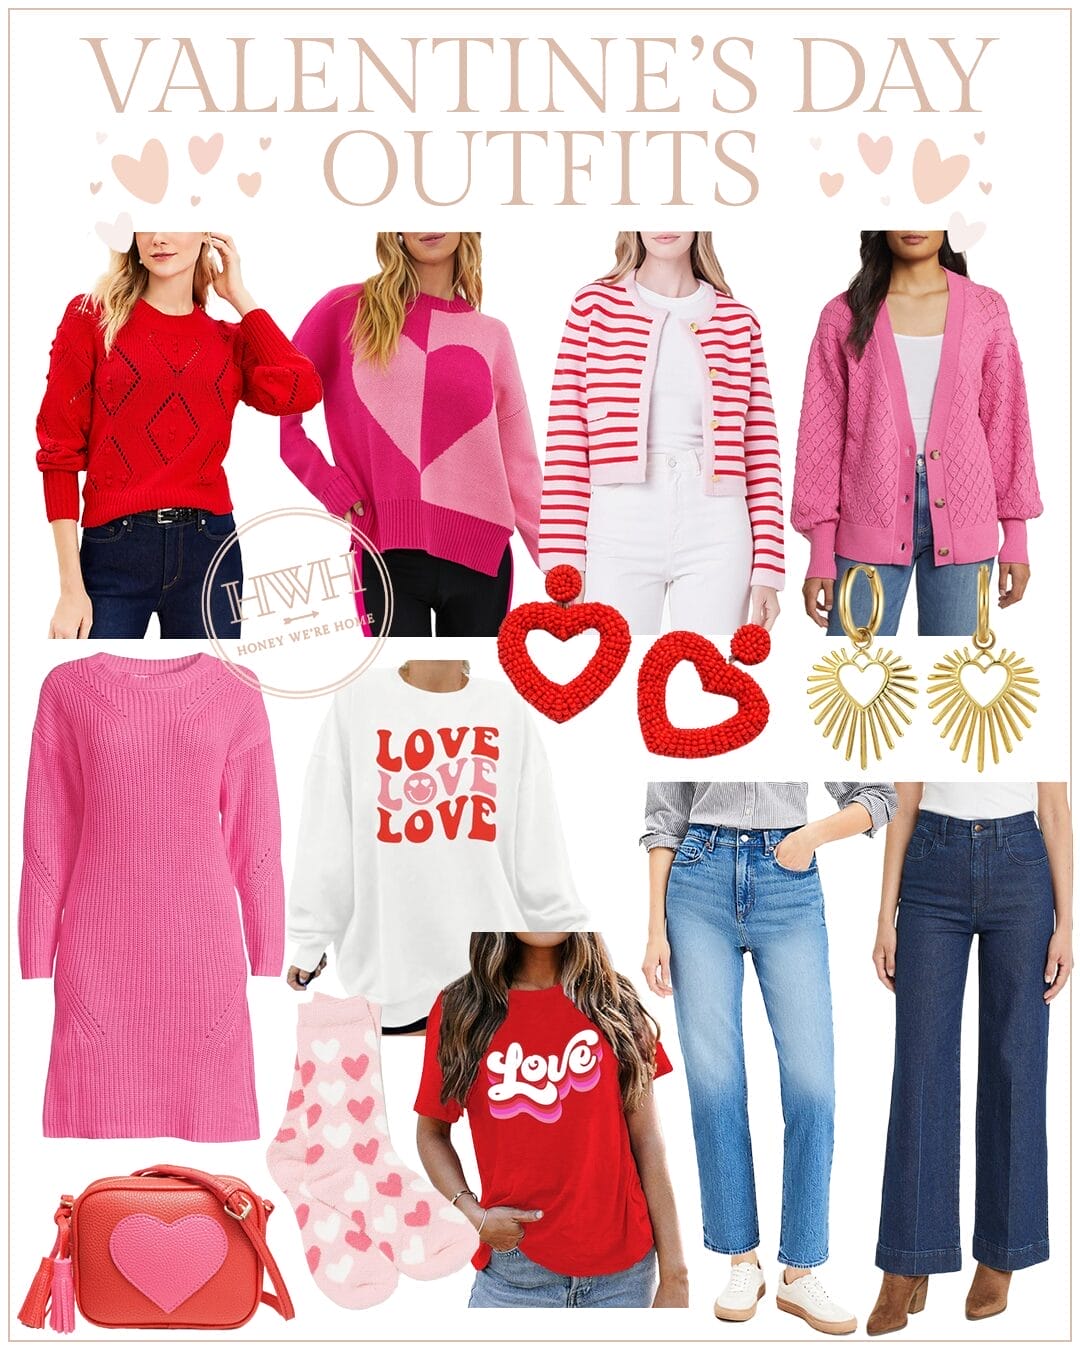 Valentine’s Day Outfits